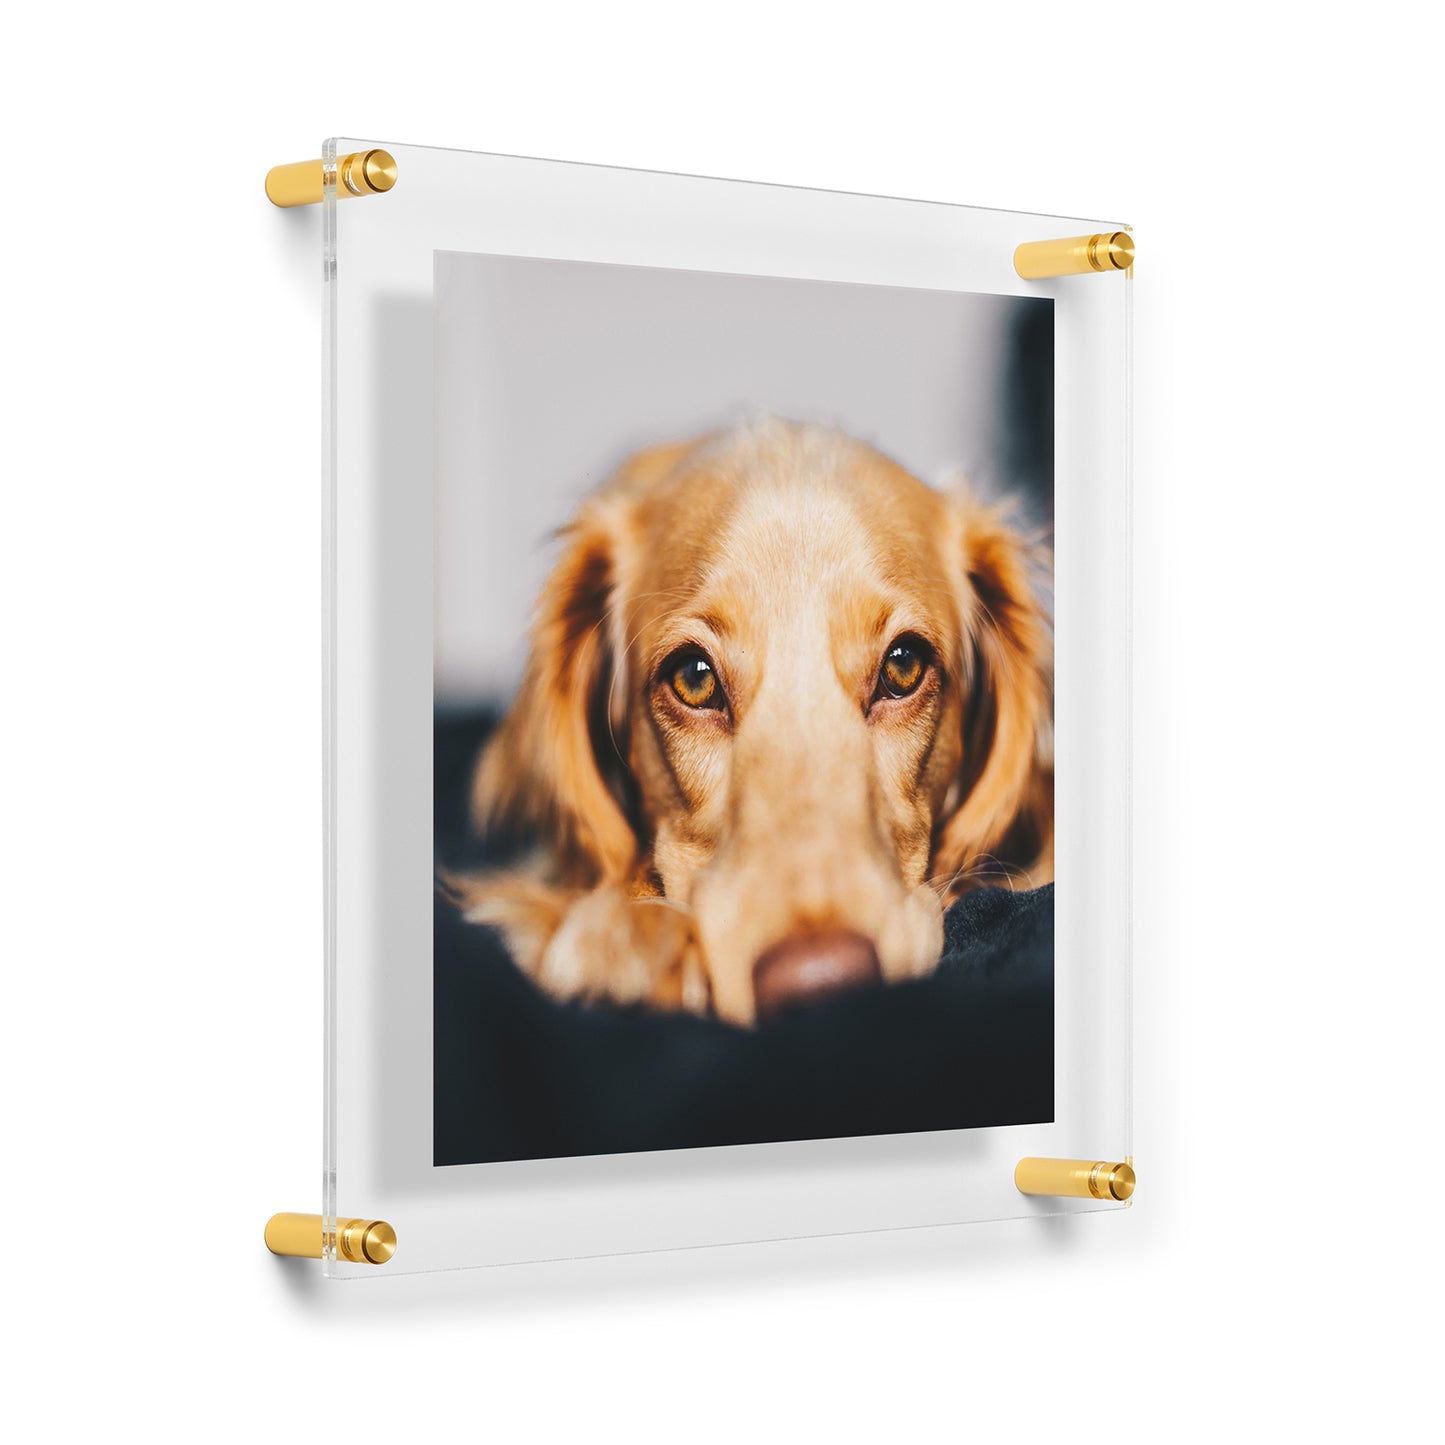 12x12" Photo Double Panel Acrylic Clear Picture Frame (Frame Size 15x15")